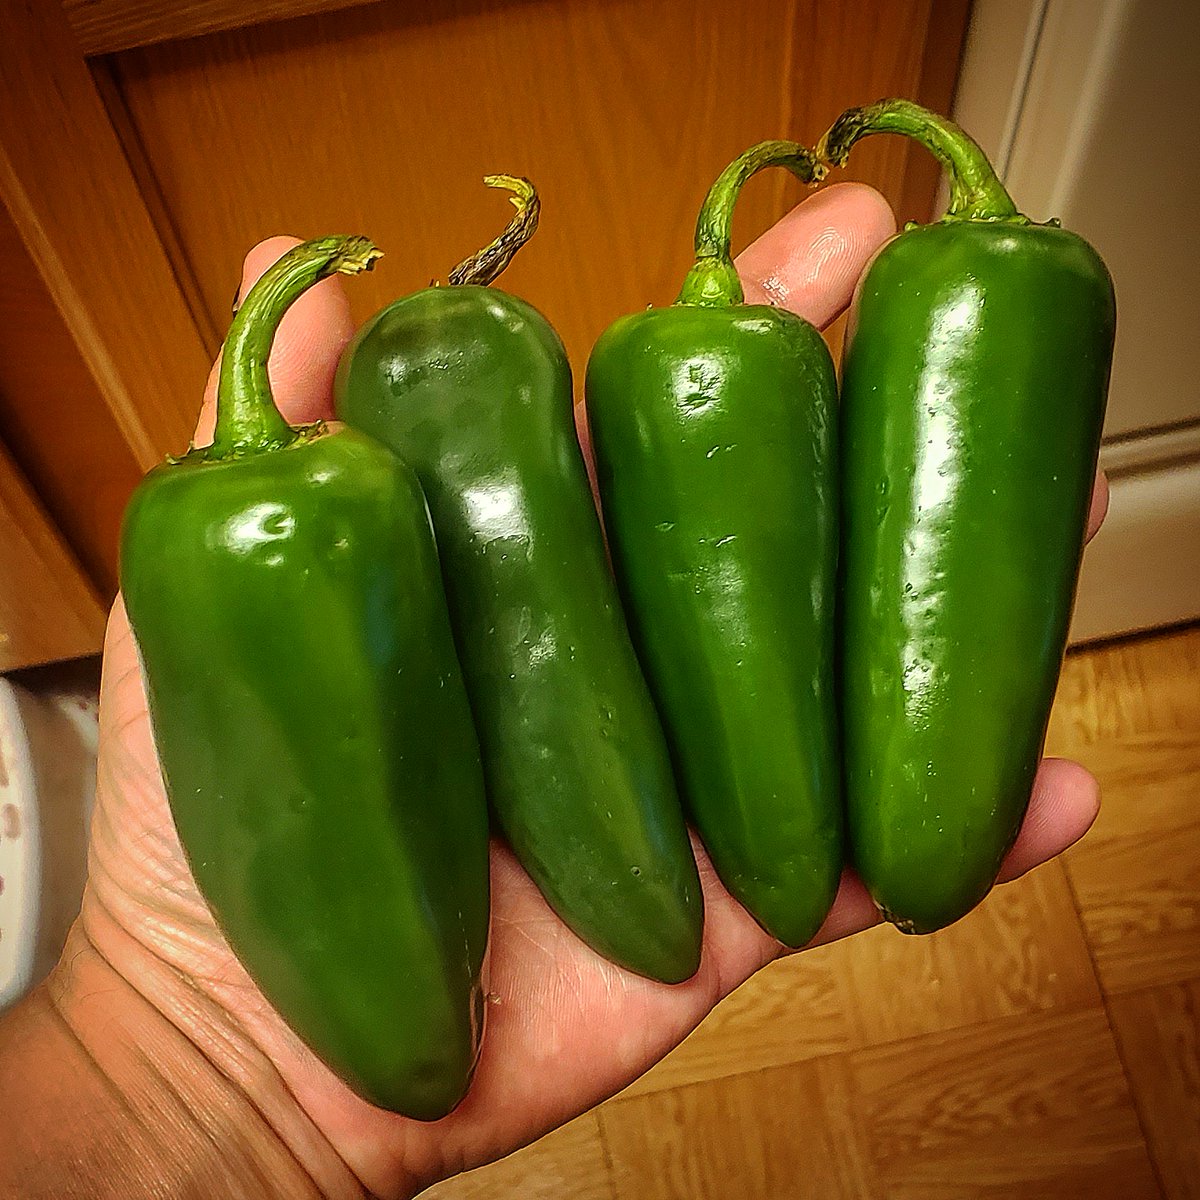 The time for the most heavy metal chili in the world is near. #Jalapenos the size of mole rats, baby!!

#Chili #Peppers #HotPeppers #Beans #ChiliSeason #Vegetarian #Vegetables #VegetarianChili #JalapenoPeppers #ChiliBeans